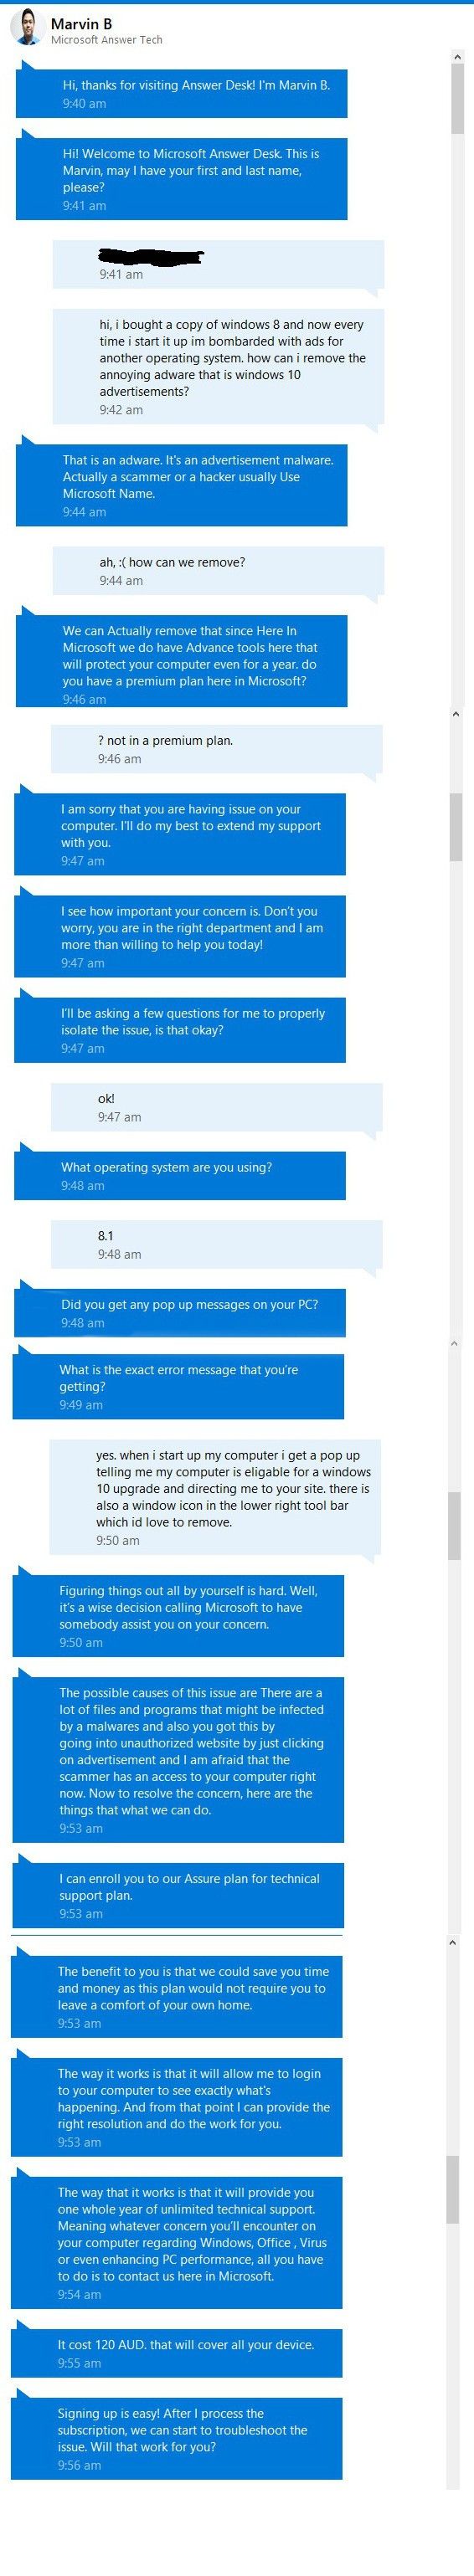 The full conversation with Microsoft's support engineer